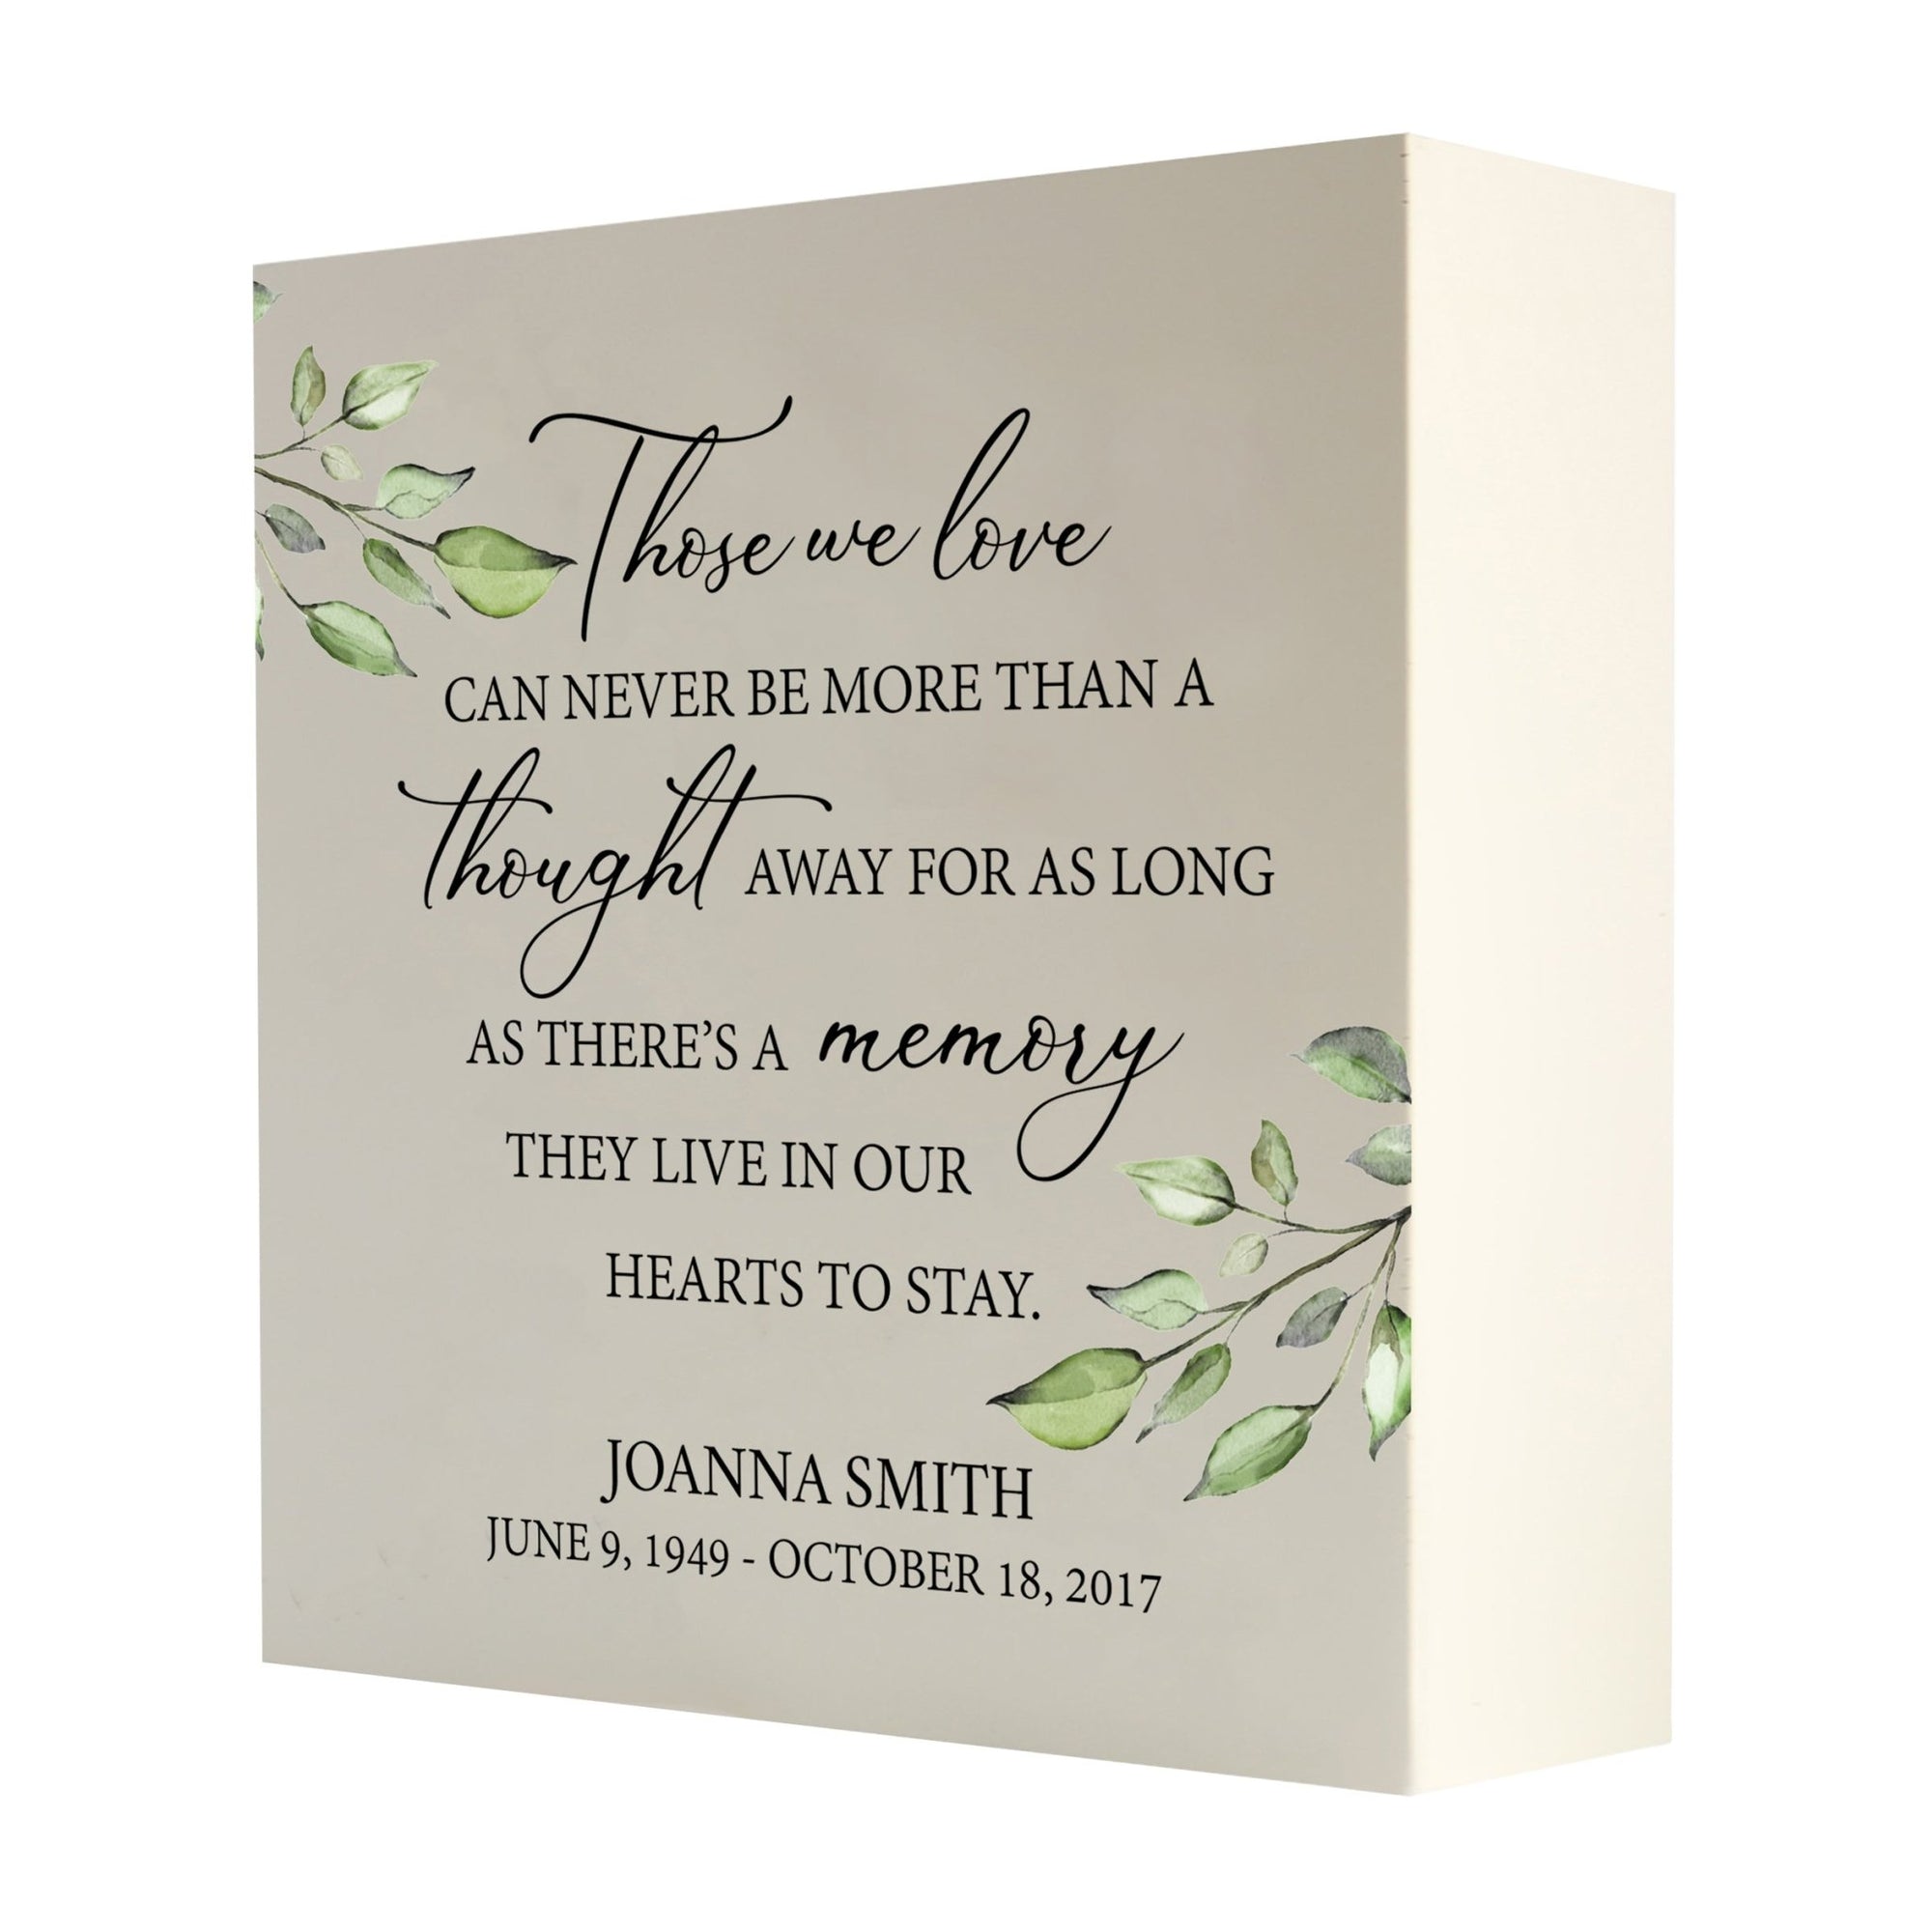 Personalized Modern Inspirational Memorial Wooden Shadow Box and Urn 10x10 holds 189 cu in of Human Ashes - Those We Love (Ivory) - LifeSong Milestones